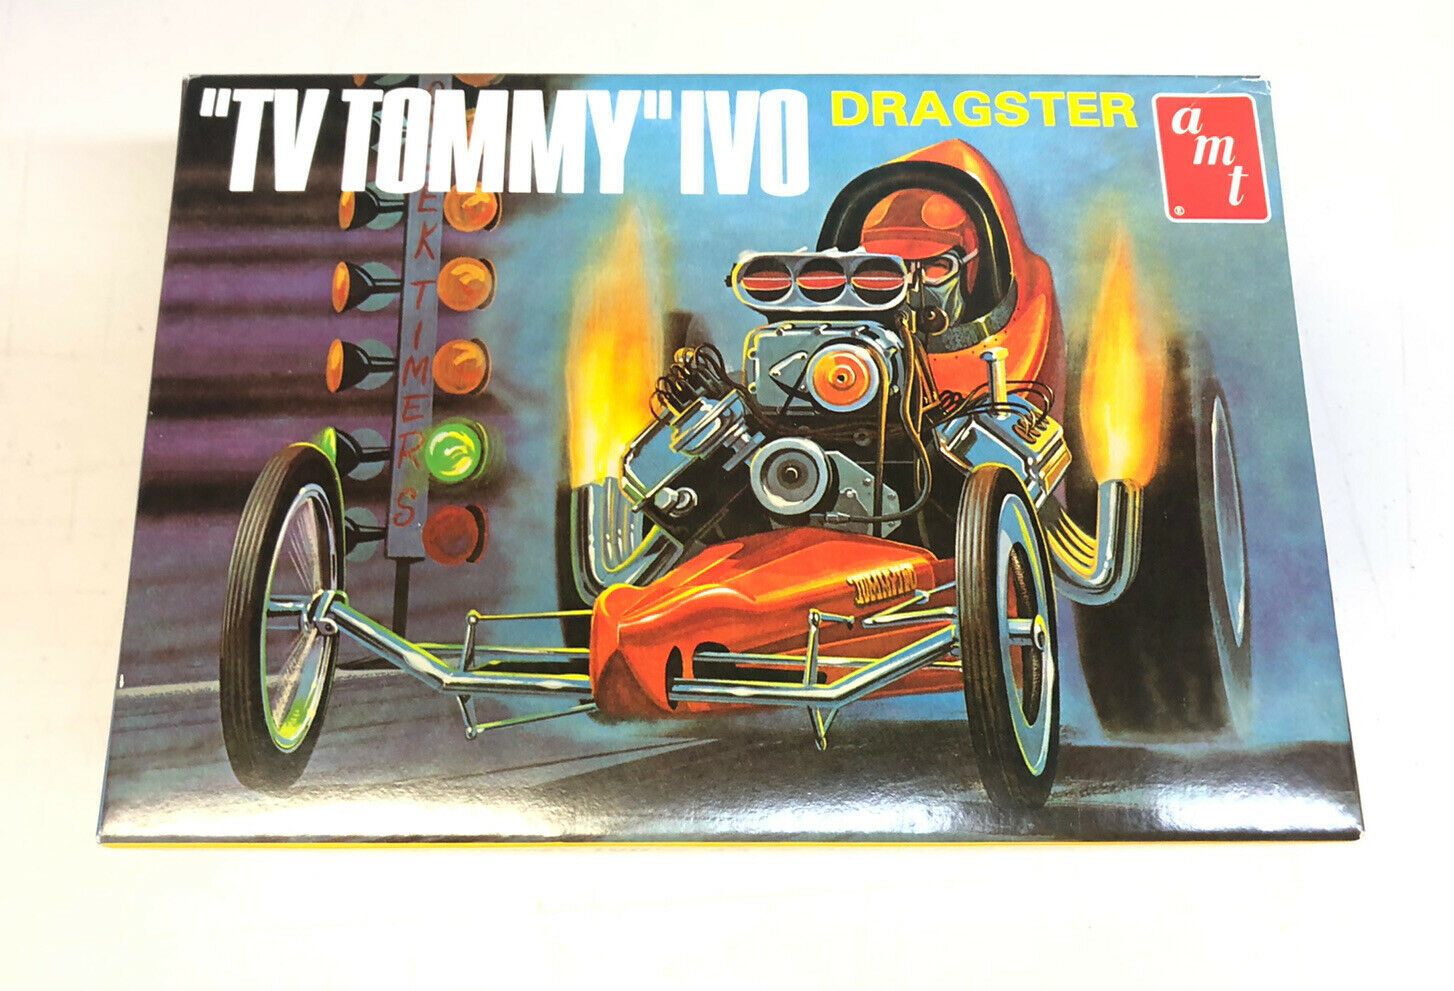 2009 Amt Tv Tommy Ivo Front Engine Dragster 1:25 Scale Model Kit # 621 Open Box